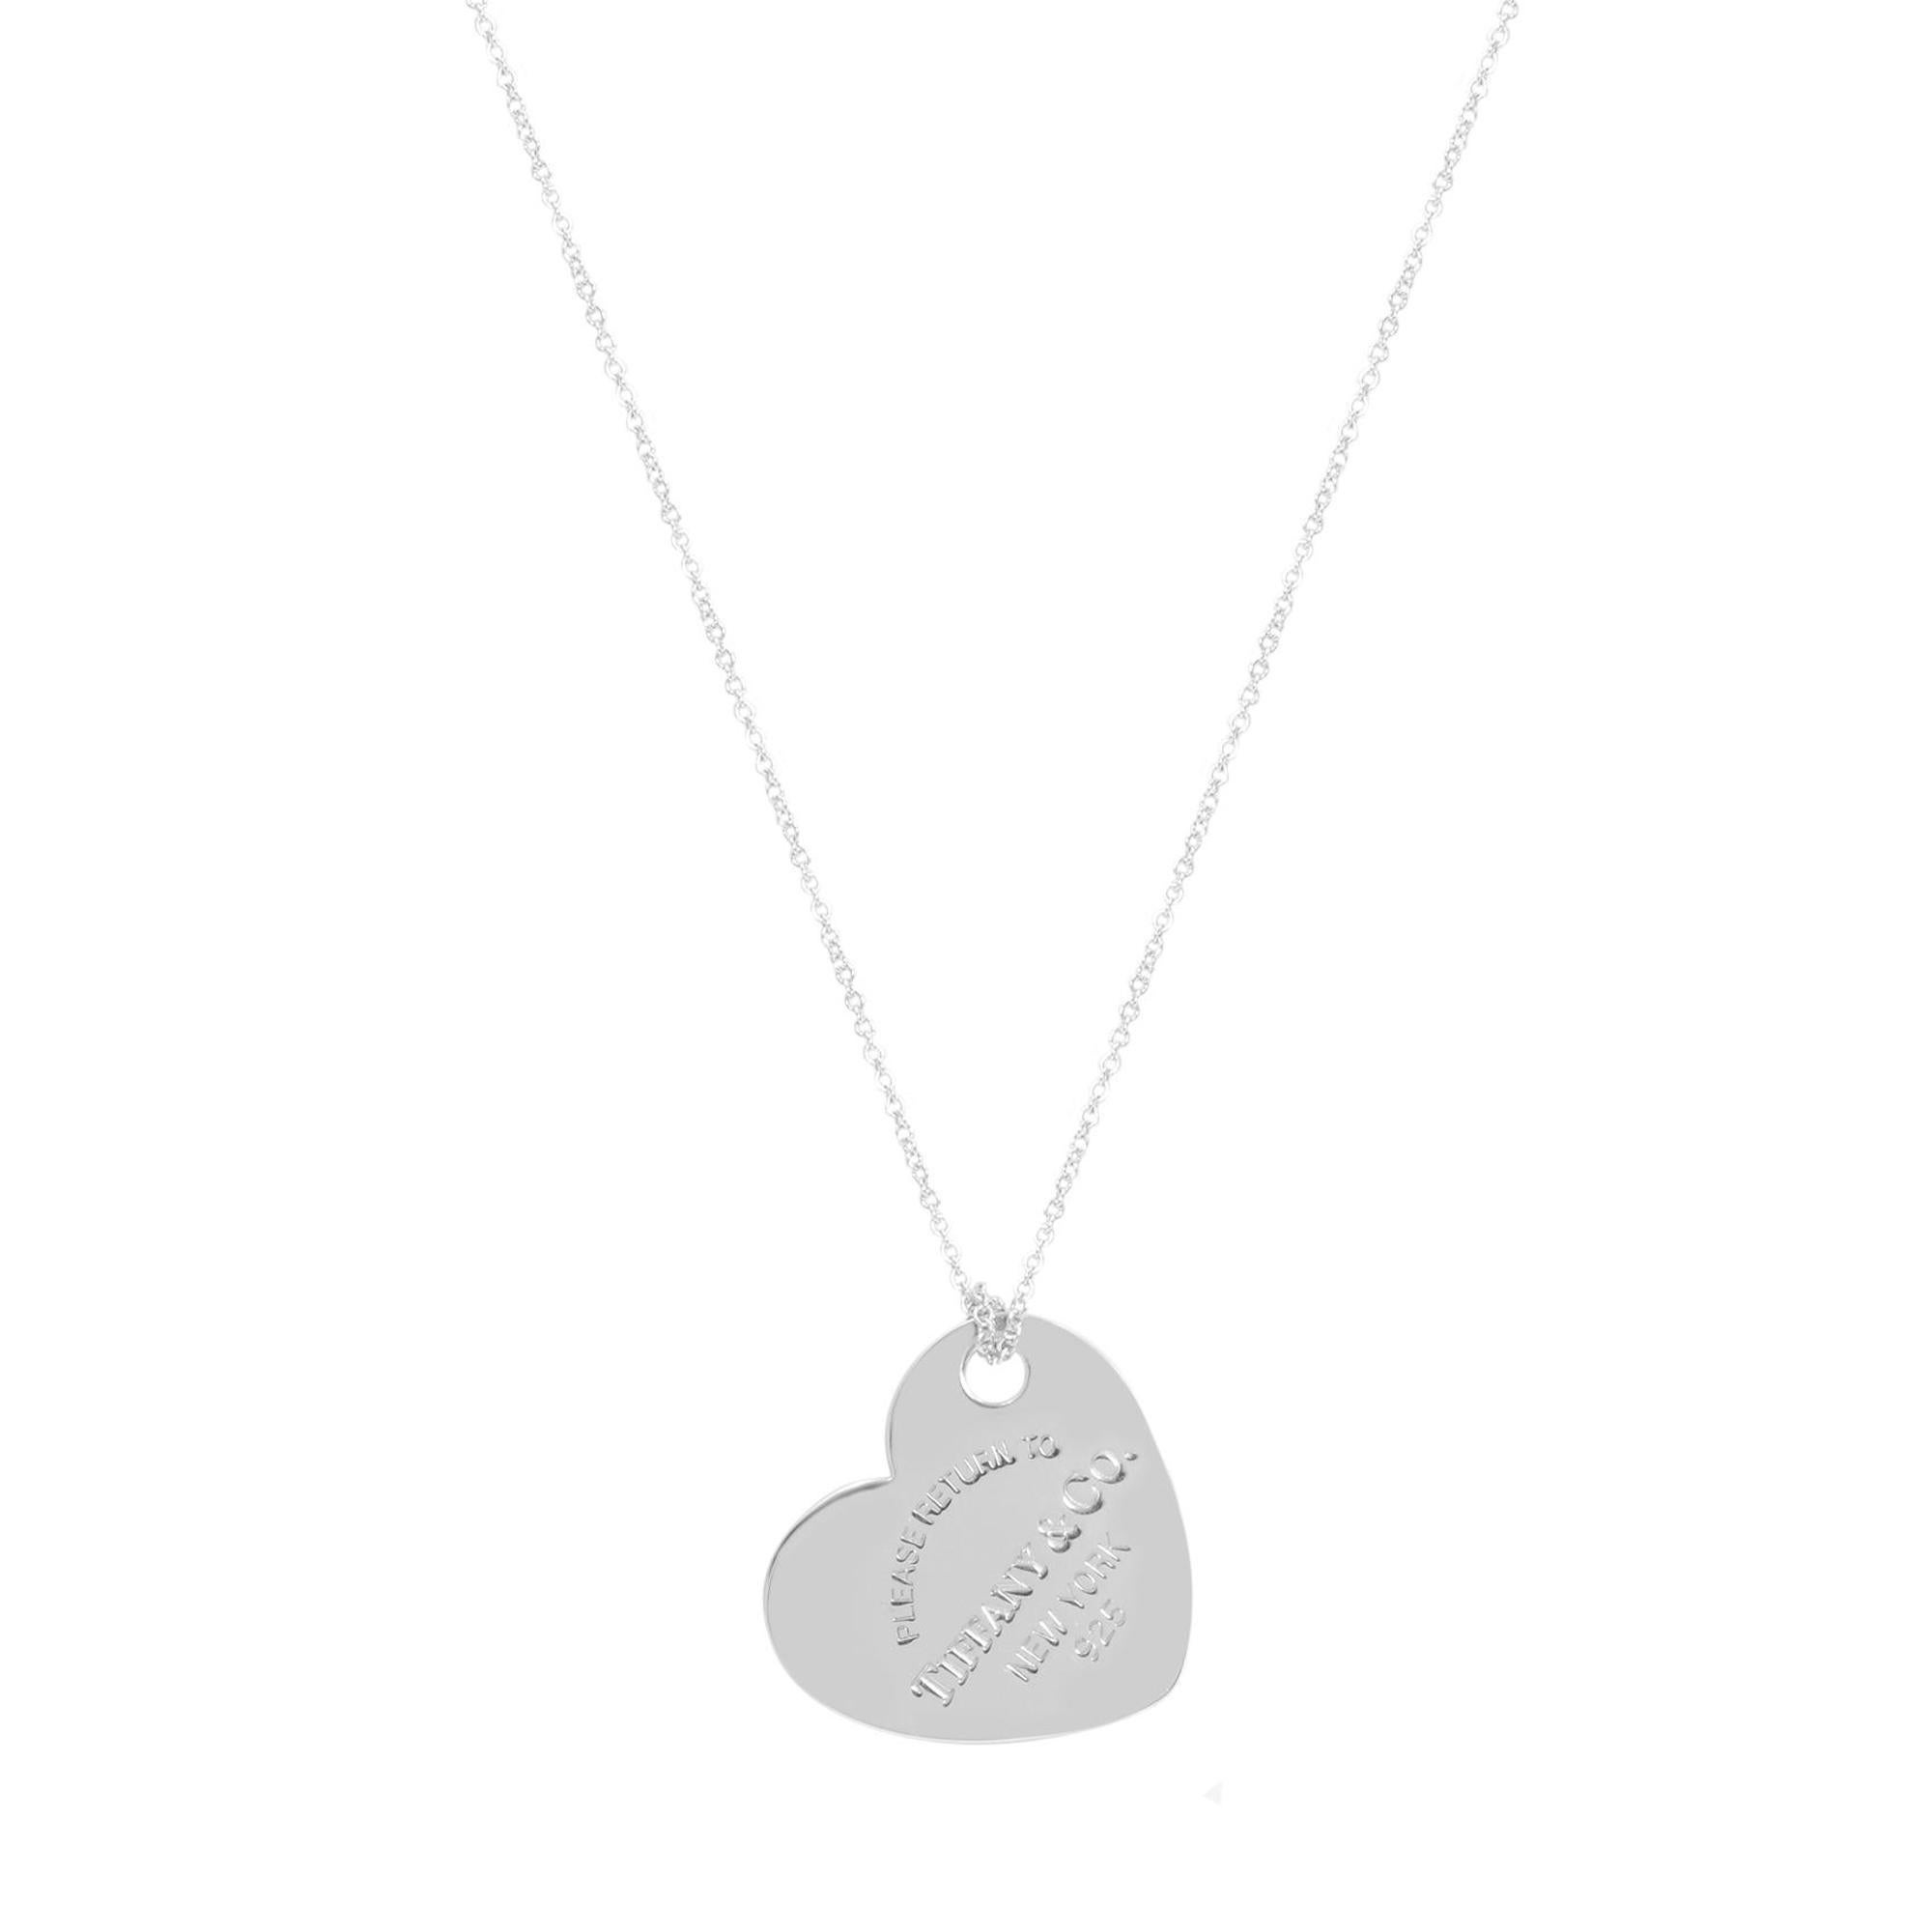 Modern Tiffany & Co. Return to Tiffany Large Heart Pendant Necklace Sterling Silver 925